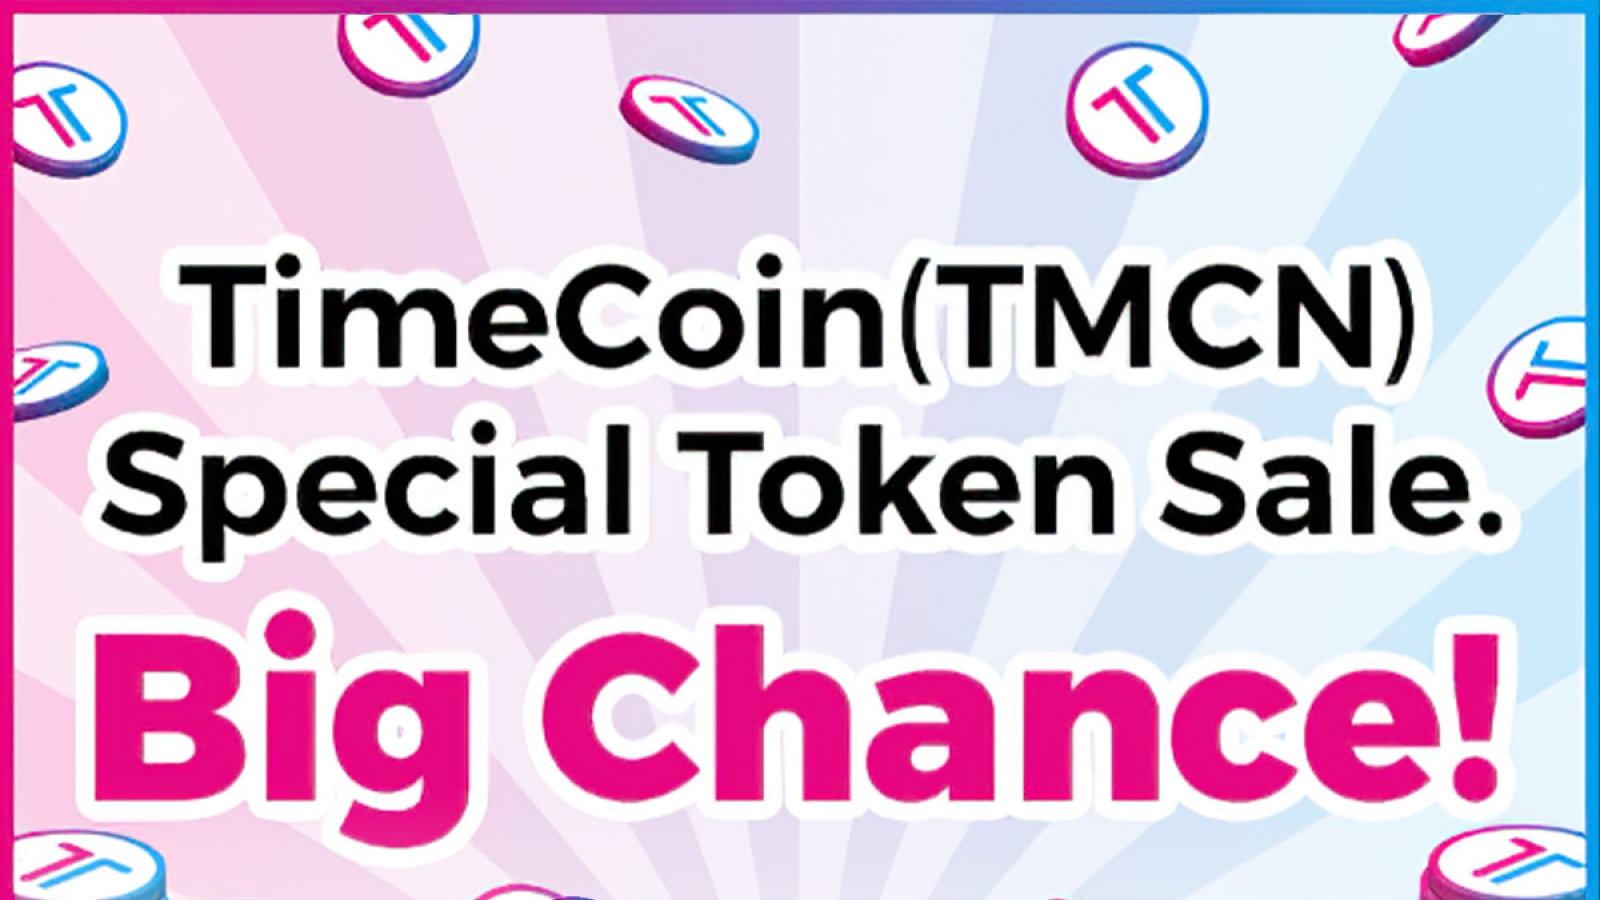 Earn $4.5 Million Worth of TimeCoin (TMCN) in The Special Token Sale